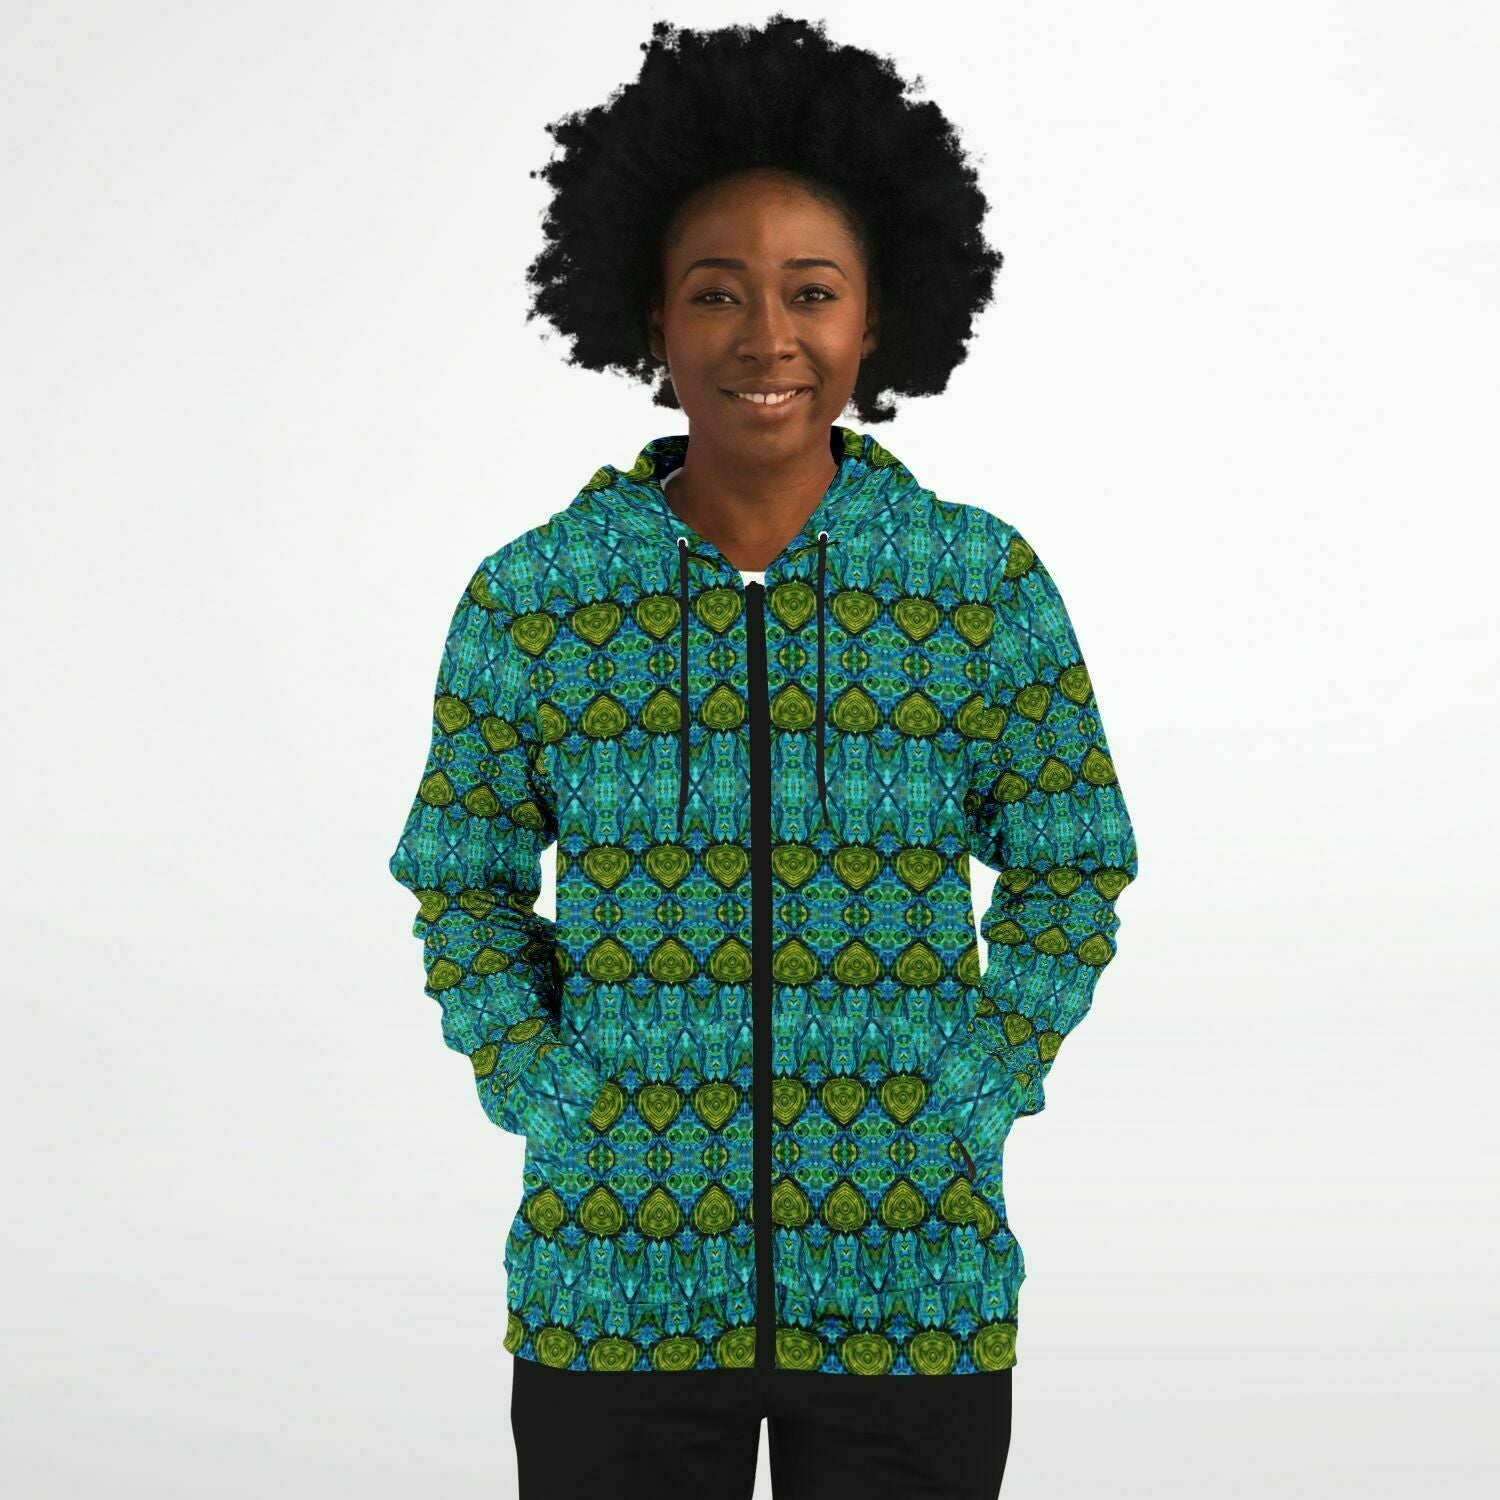 Awesome full zip Hoodie with cool print and pockets